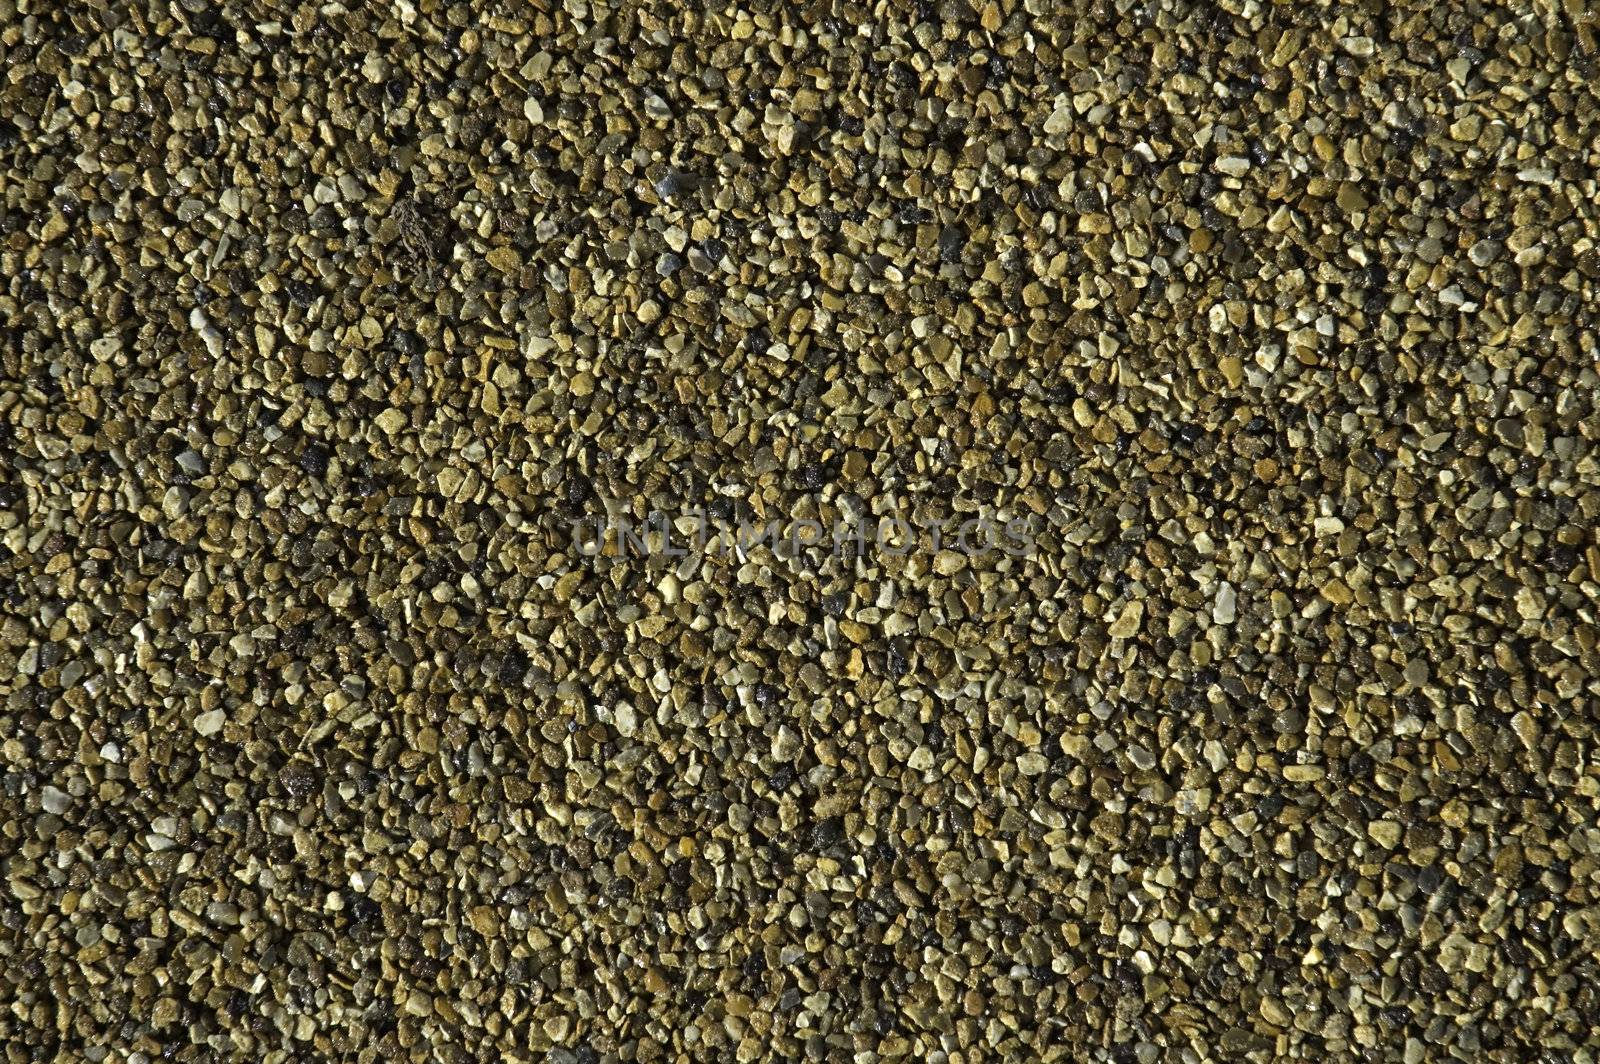 Closer view of gravel background